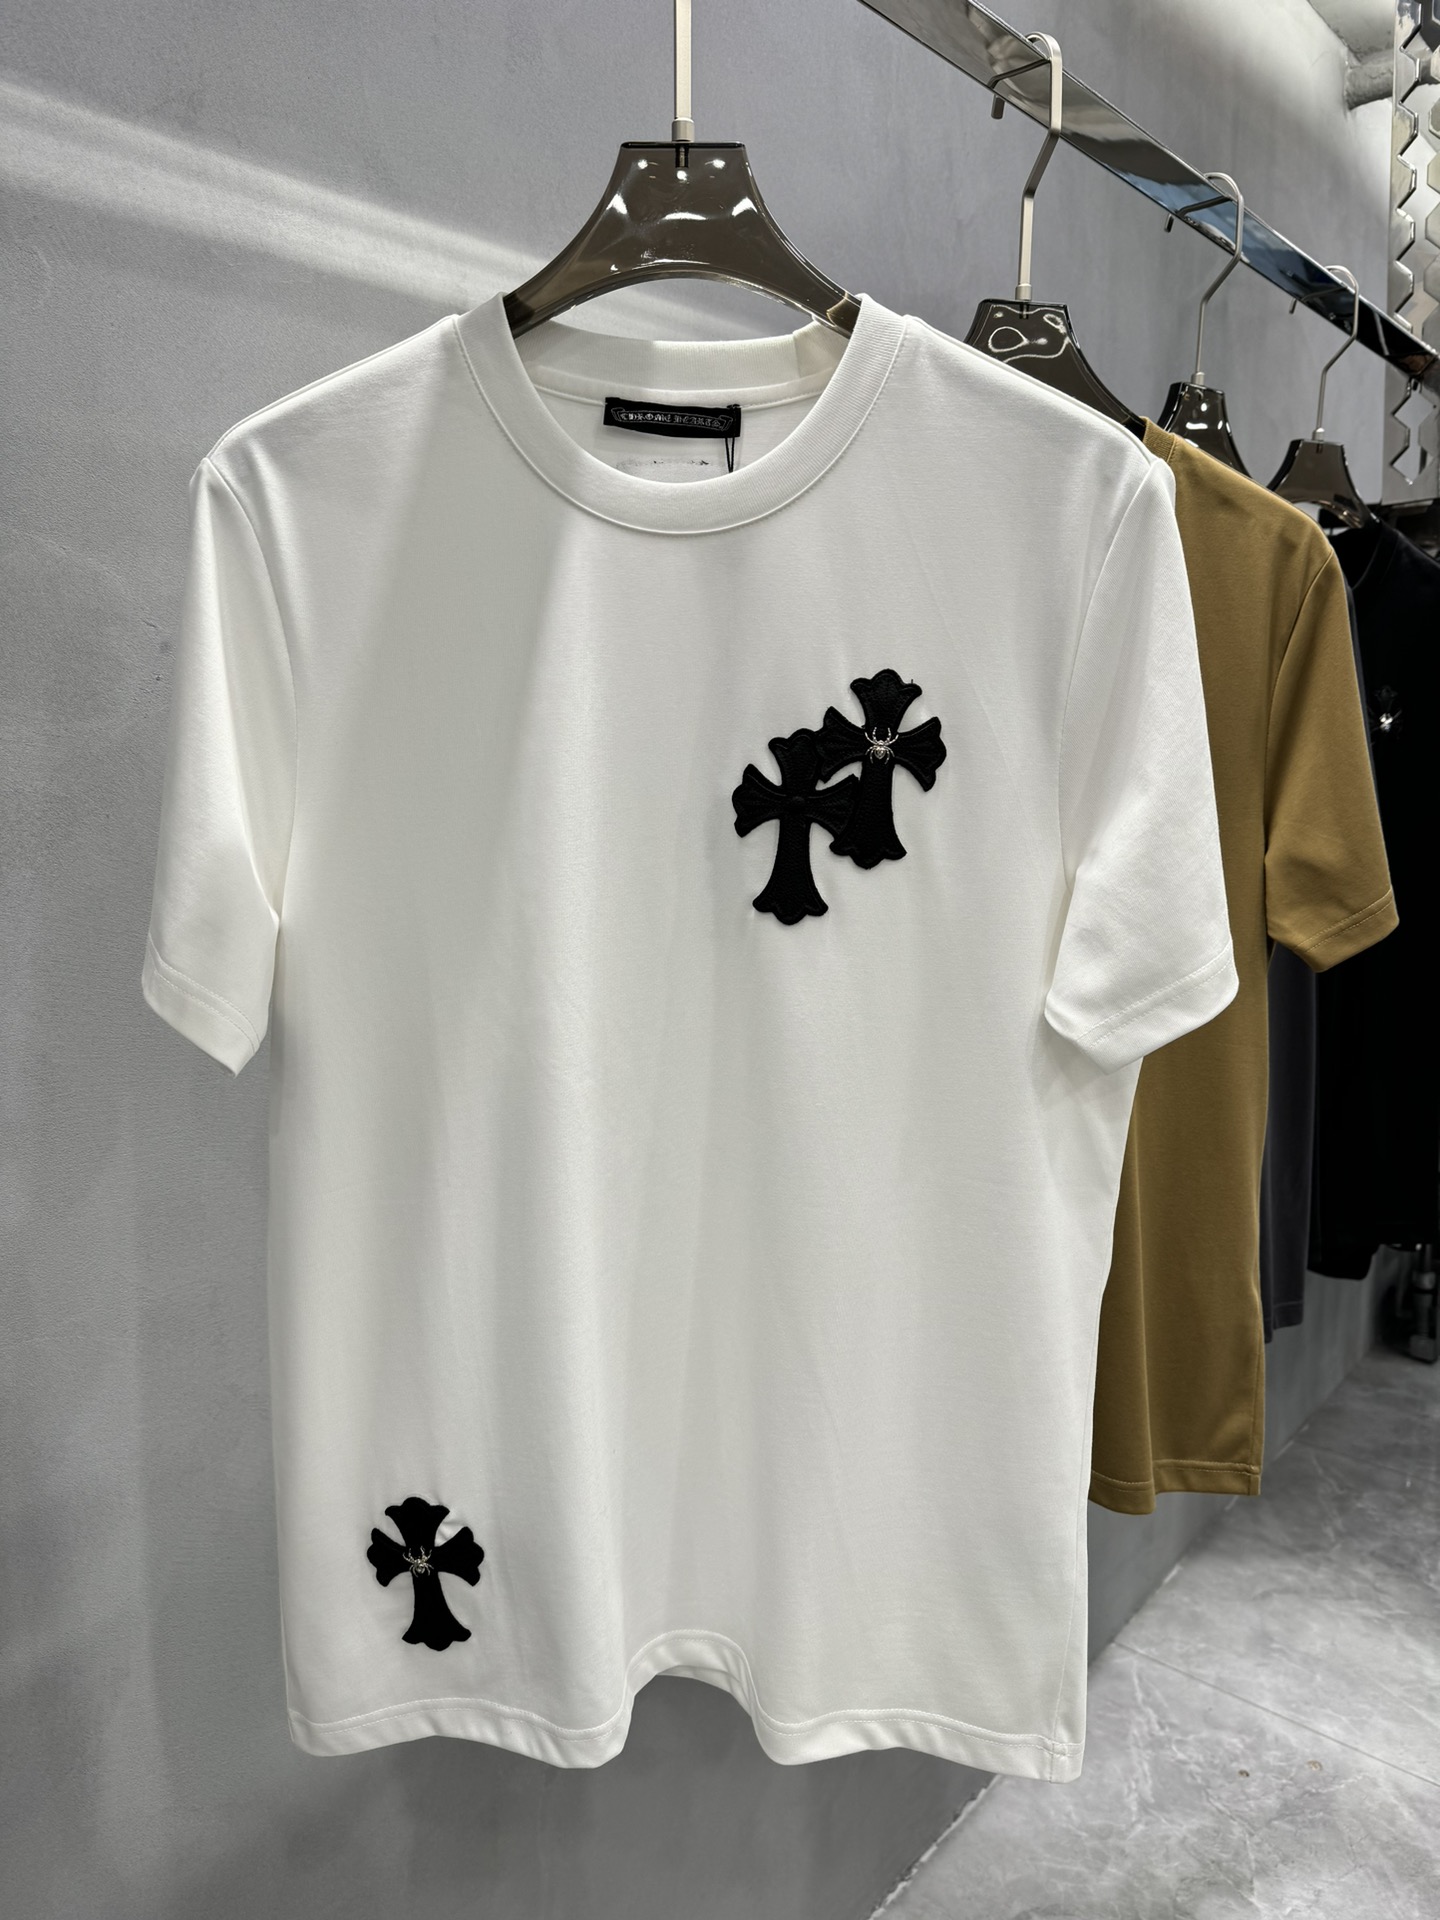 Chrome Hearts Clothing T-Shirt Black Grey Khaki Red White Cotton Spring/Summer Collection Short Sleeve